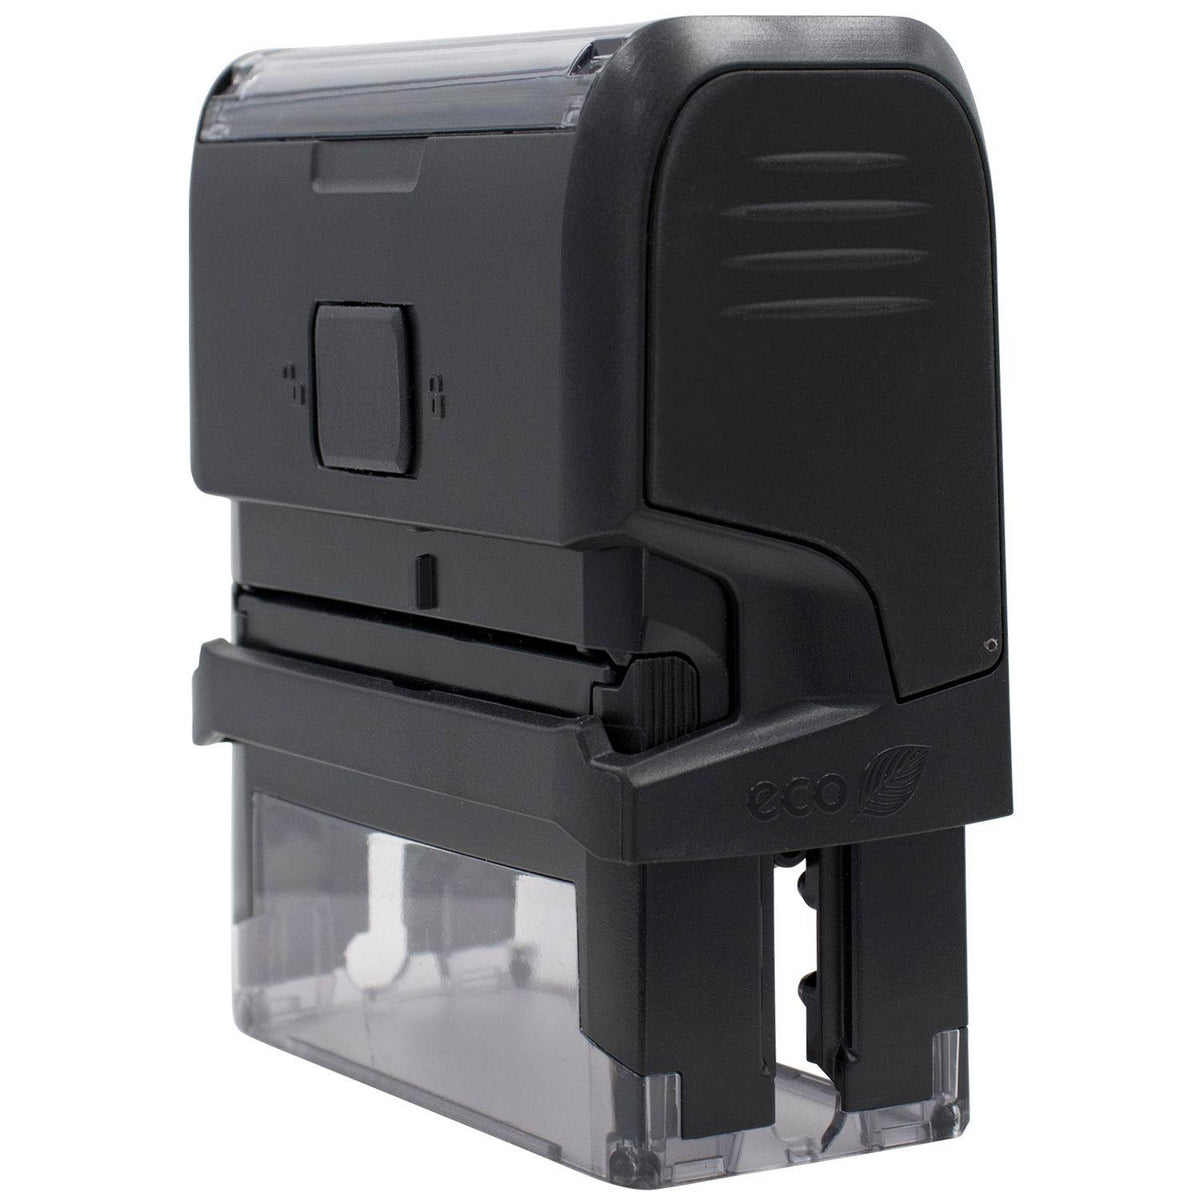 Side View of Large Self Inking Appraisal Stamp at an Angle